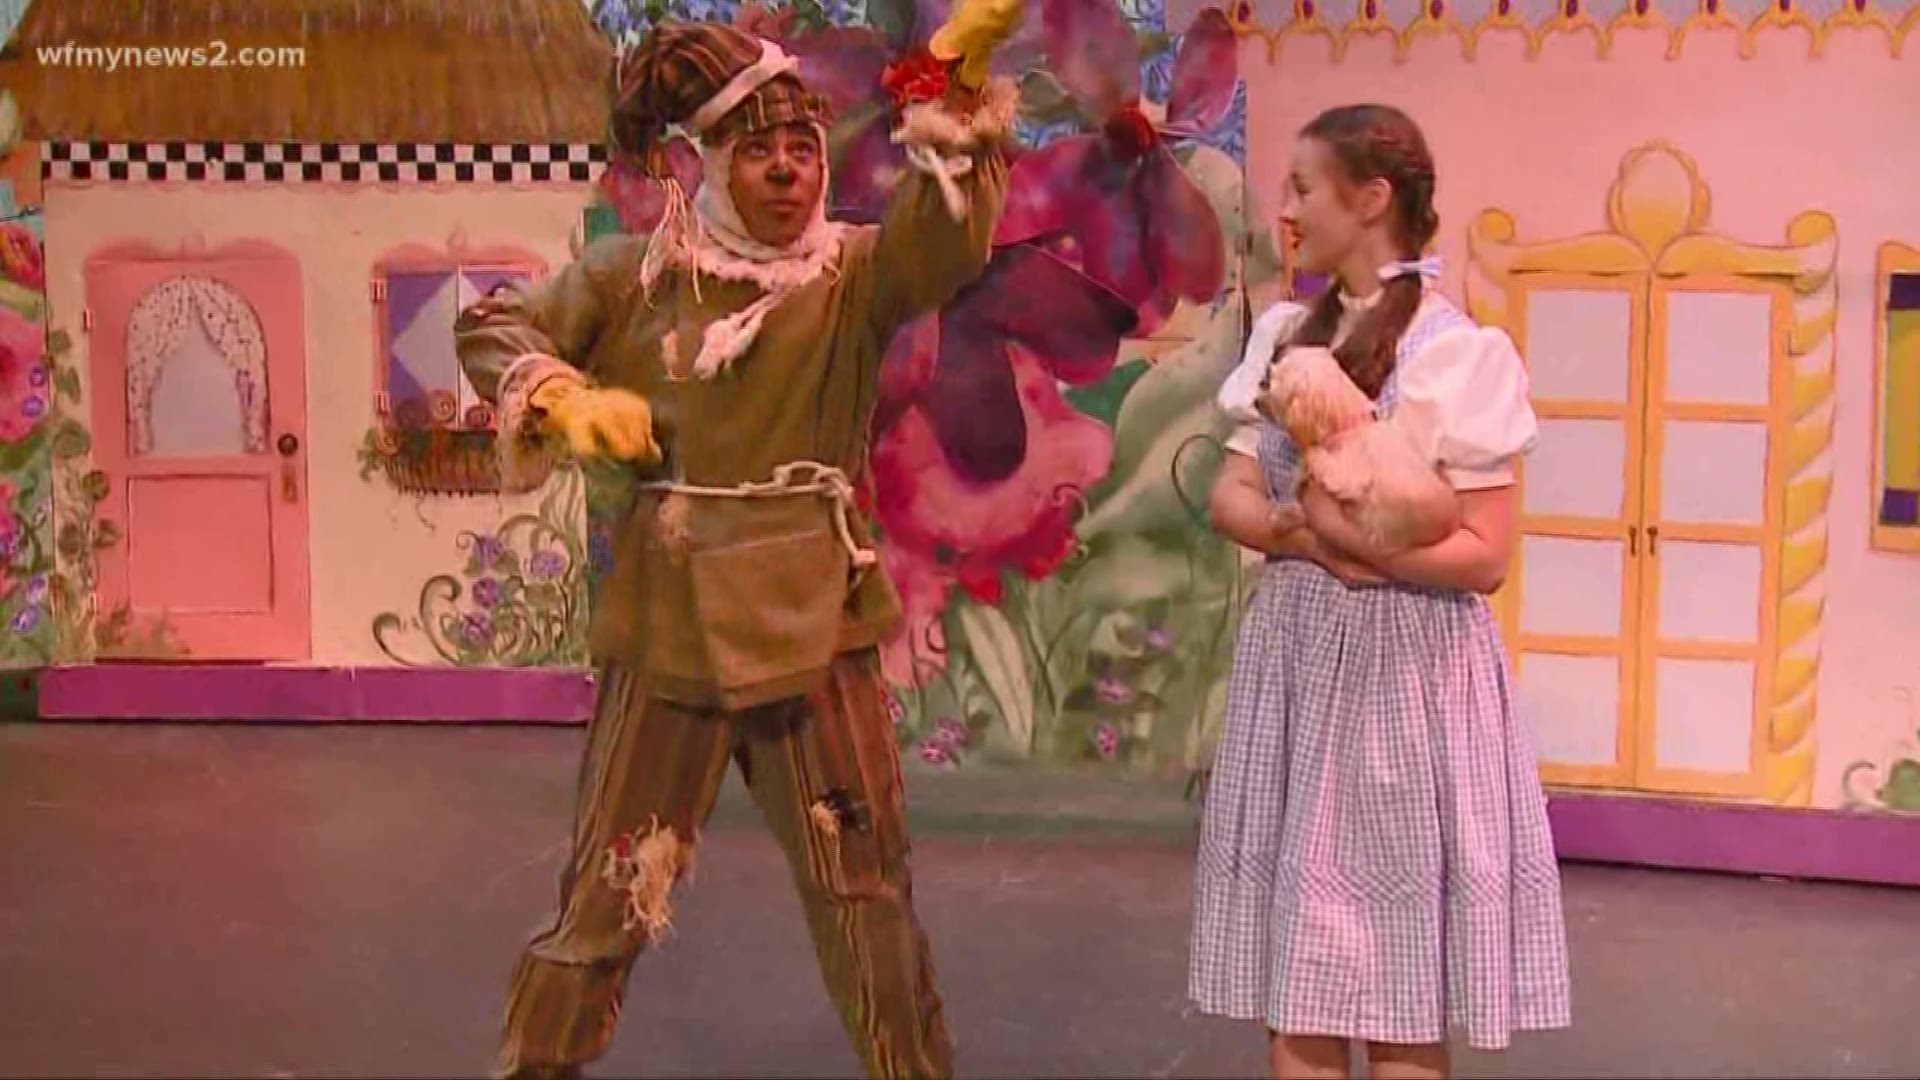 Wizard Of Oz Cast Preforms 'If I Only Had A Brain'